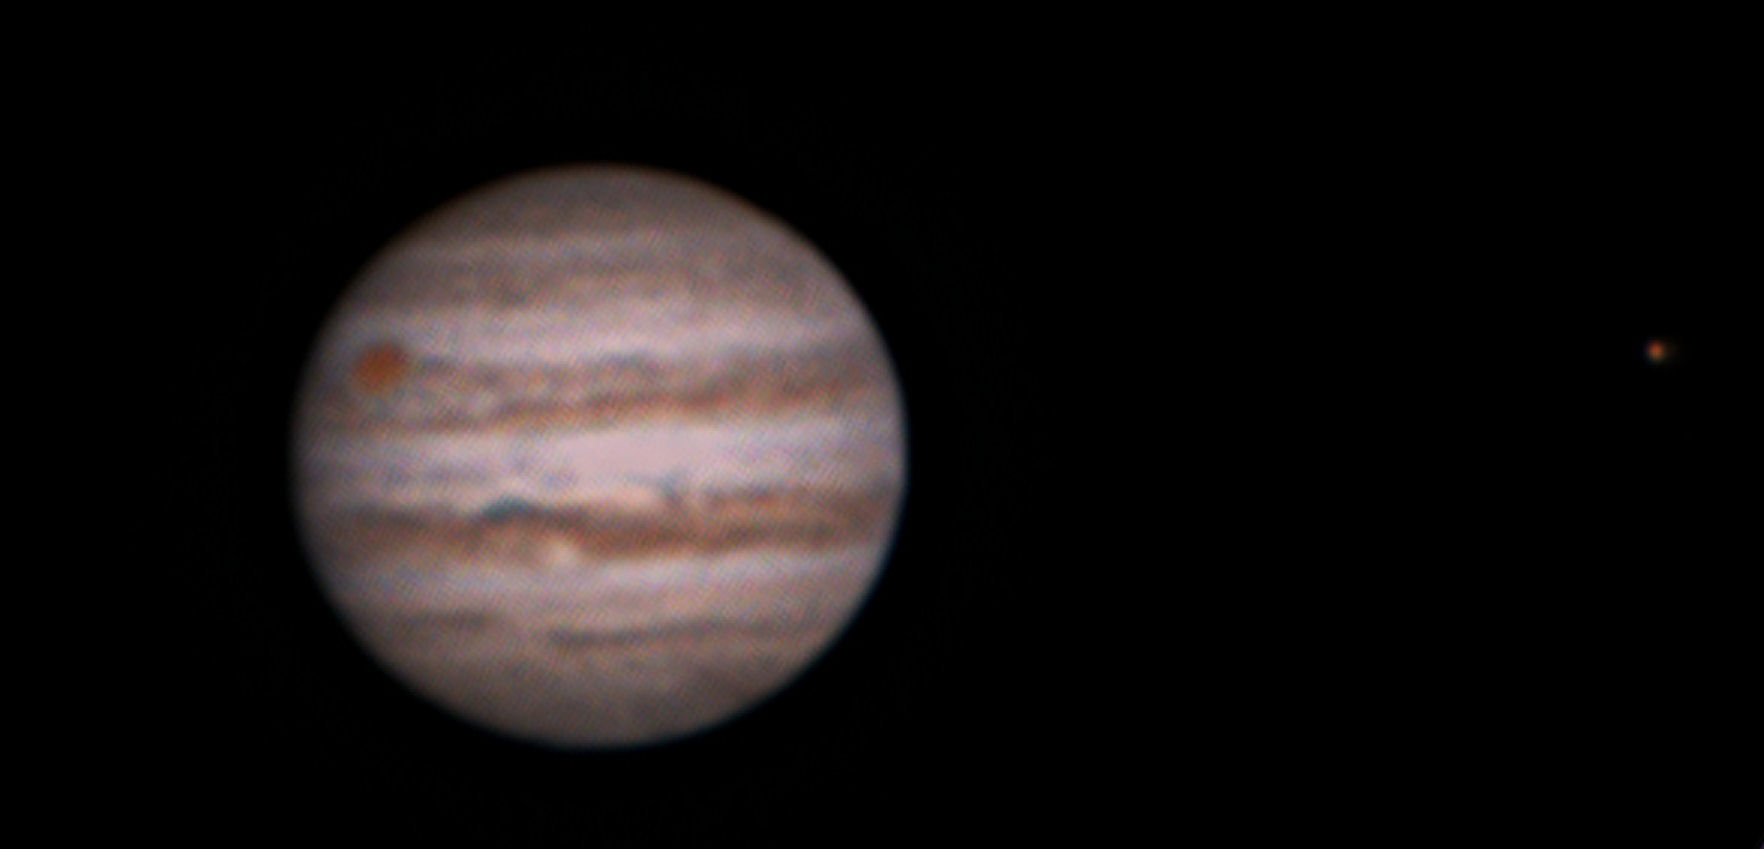 Jupiter By Alan Clitherow. 23rd January 2016 at around 0330am. This picture shows Jupiter presented South-up with The Great Red Spot, and the widening North Equatorial Belt with the White Spot Zulu clearly visible.